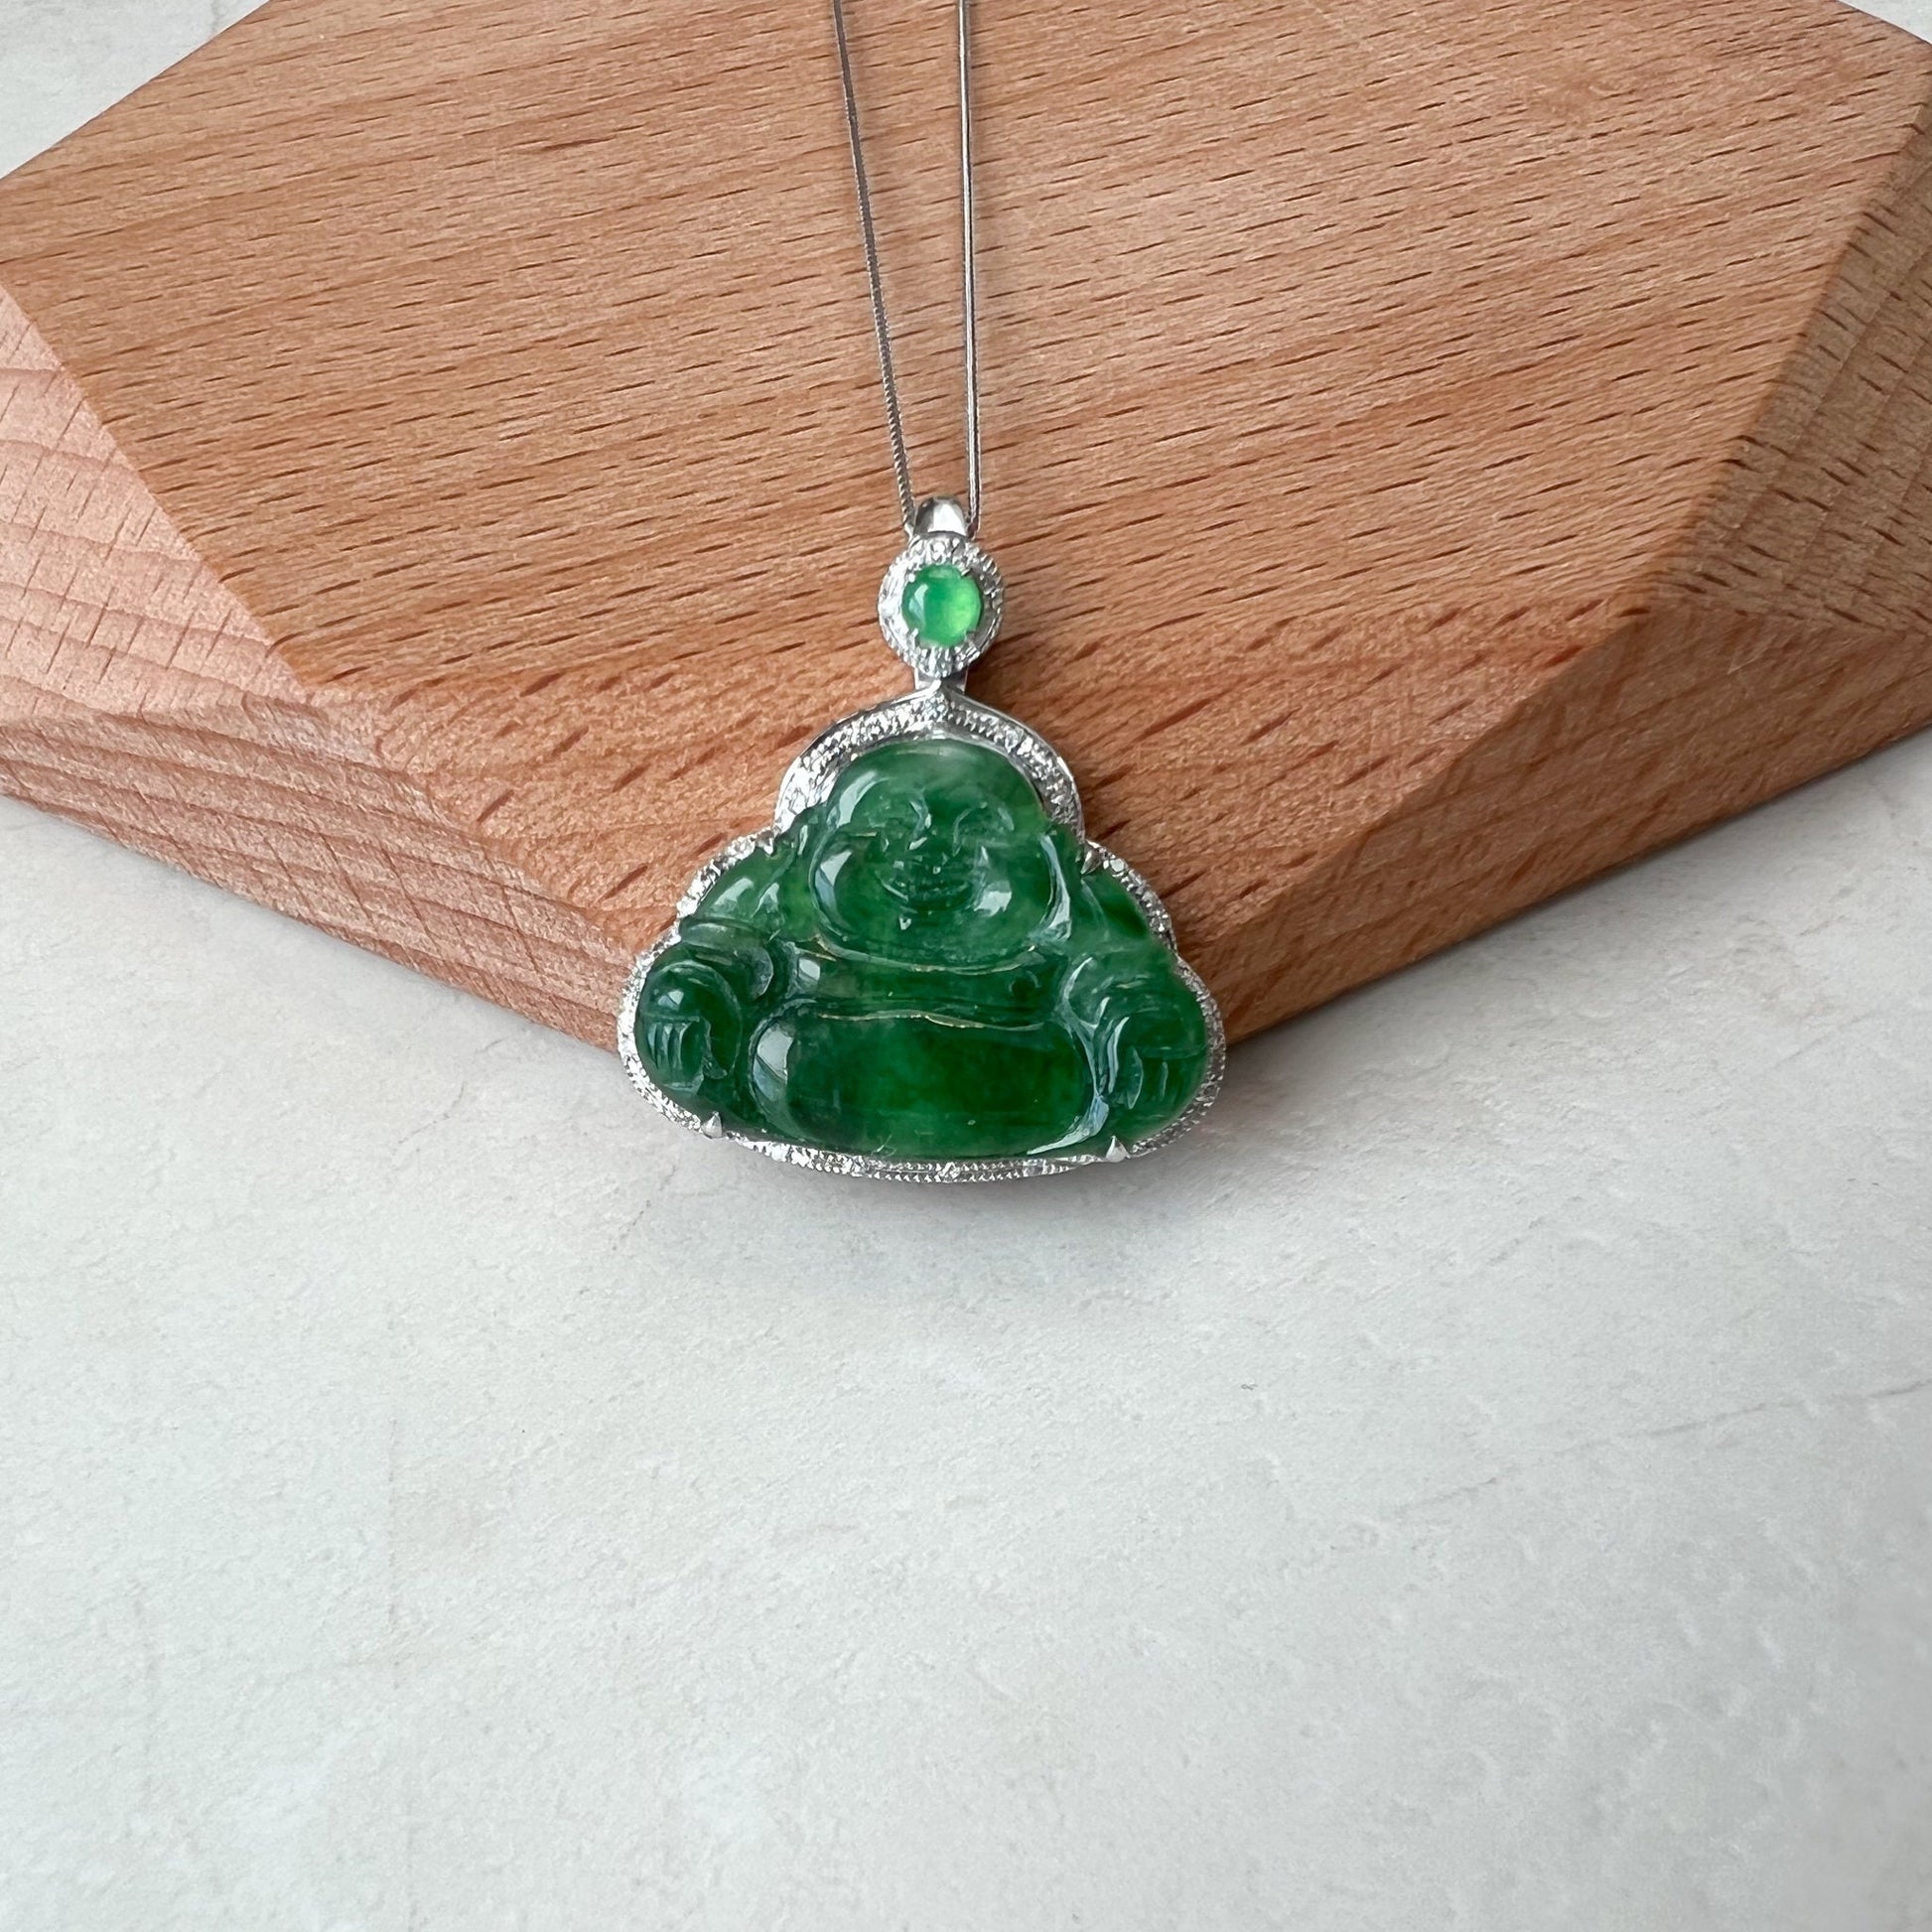 Small Green Happy Buddha, Jadeite Jade, 18K White Gold Set & Chain, Hand Carved Pendant Necklace, QY-0921-DFZB45529 - AriaDesignCollection